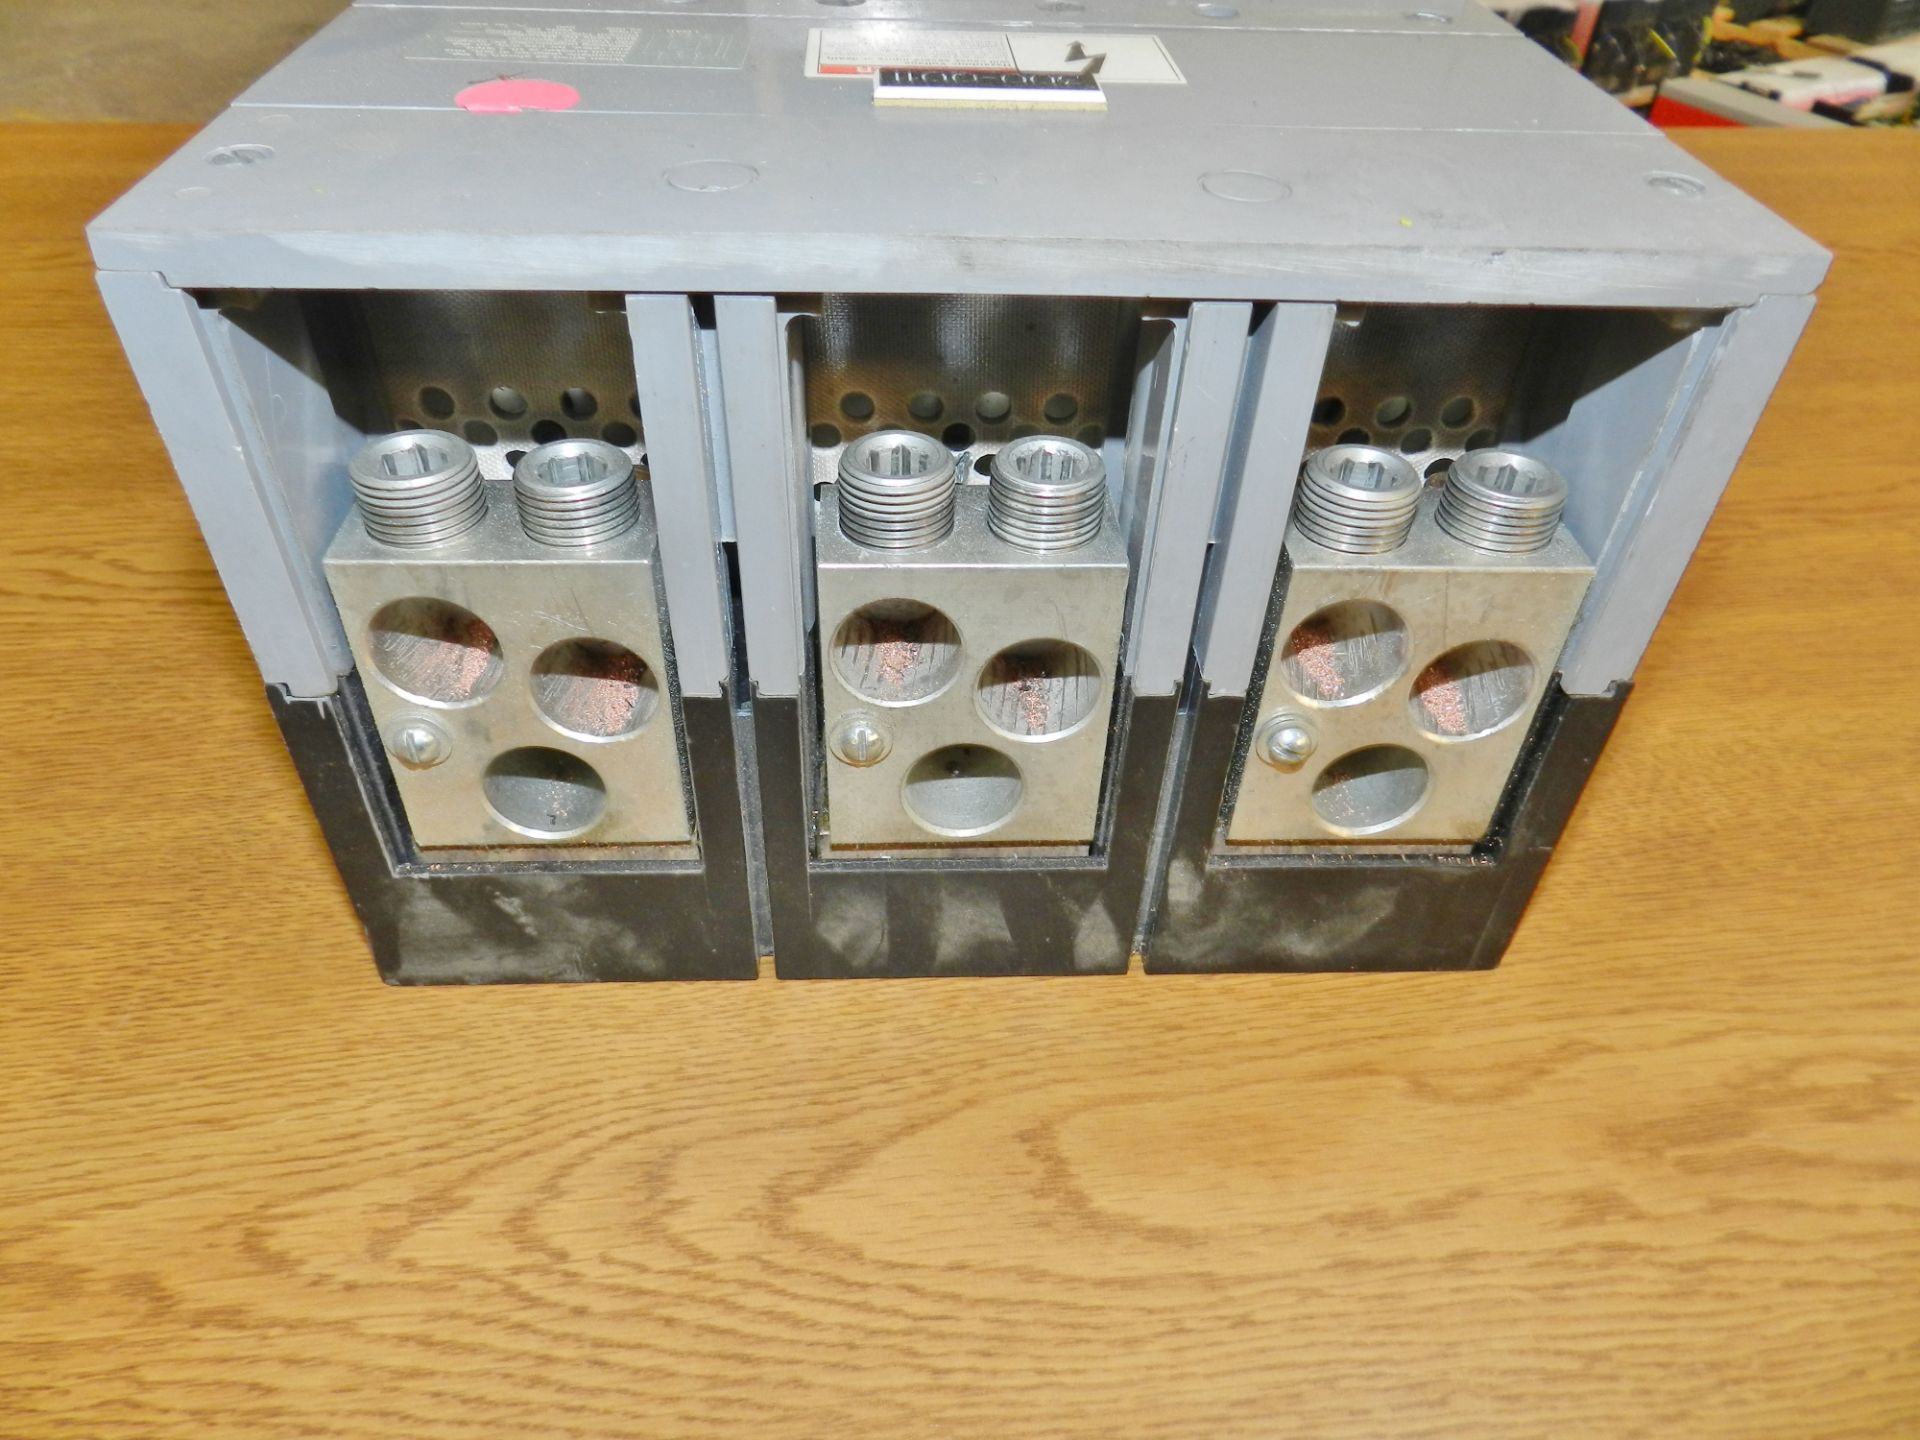 Lot of 10 Siemens Breakers (175A-800A) - Image 19 of 23